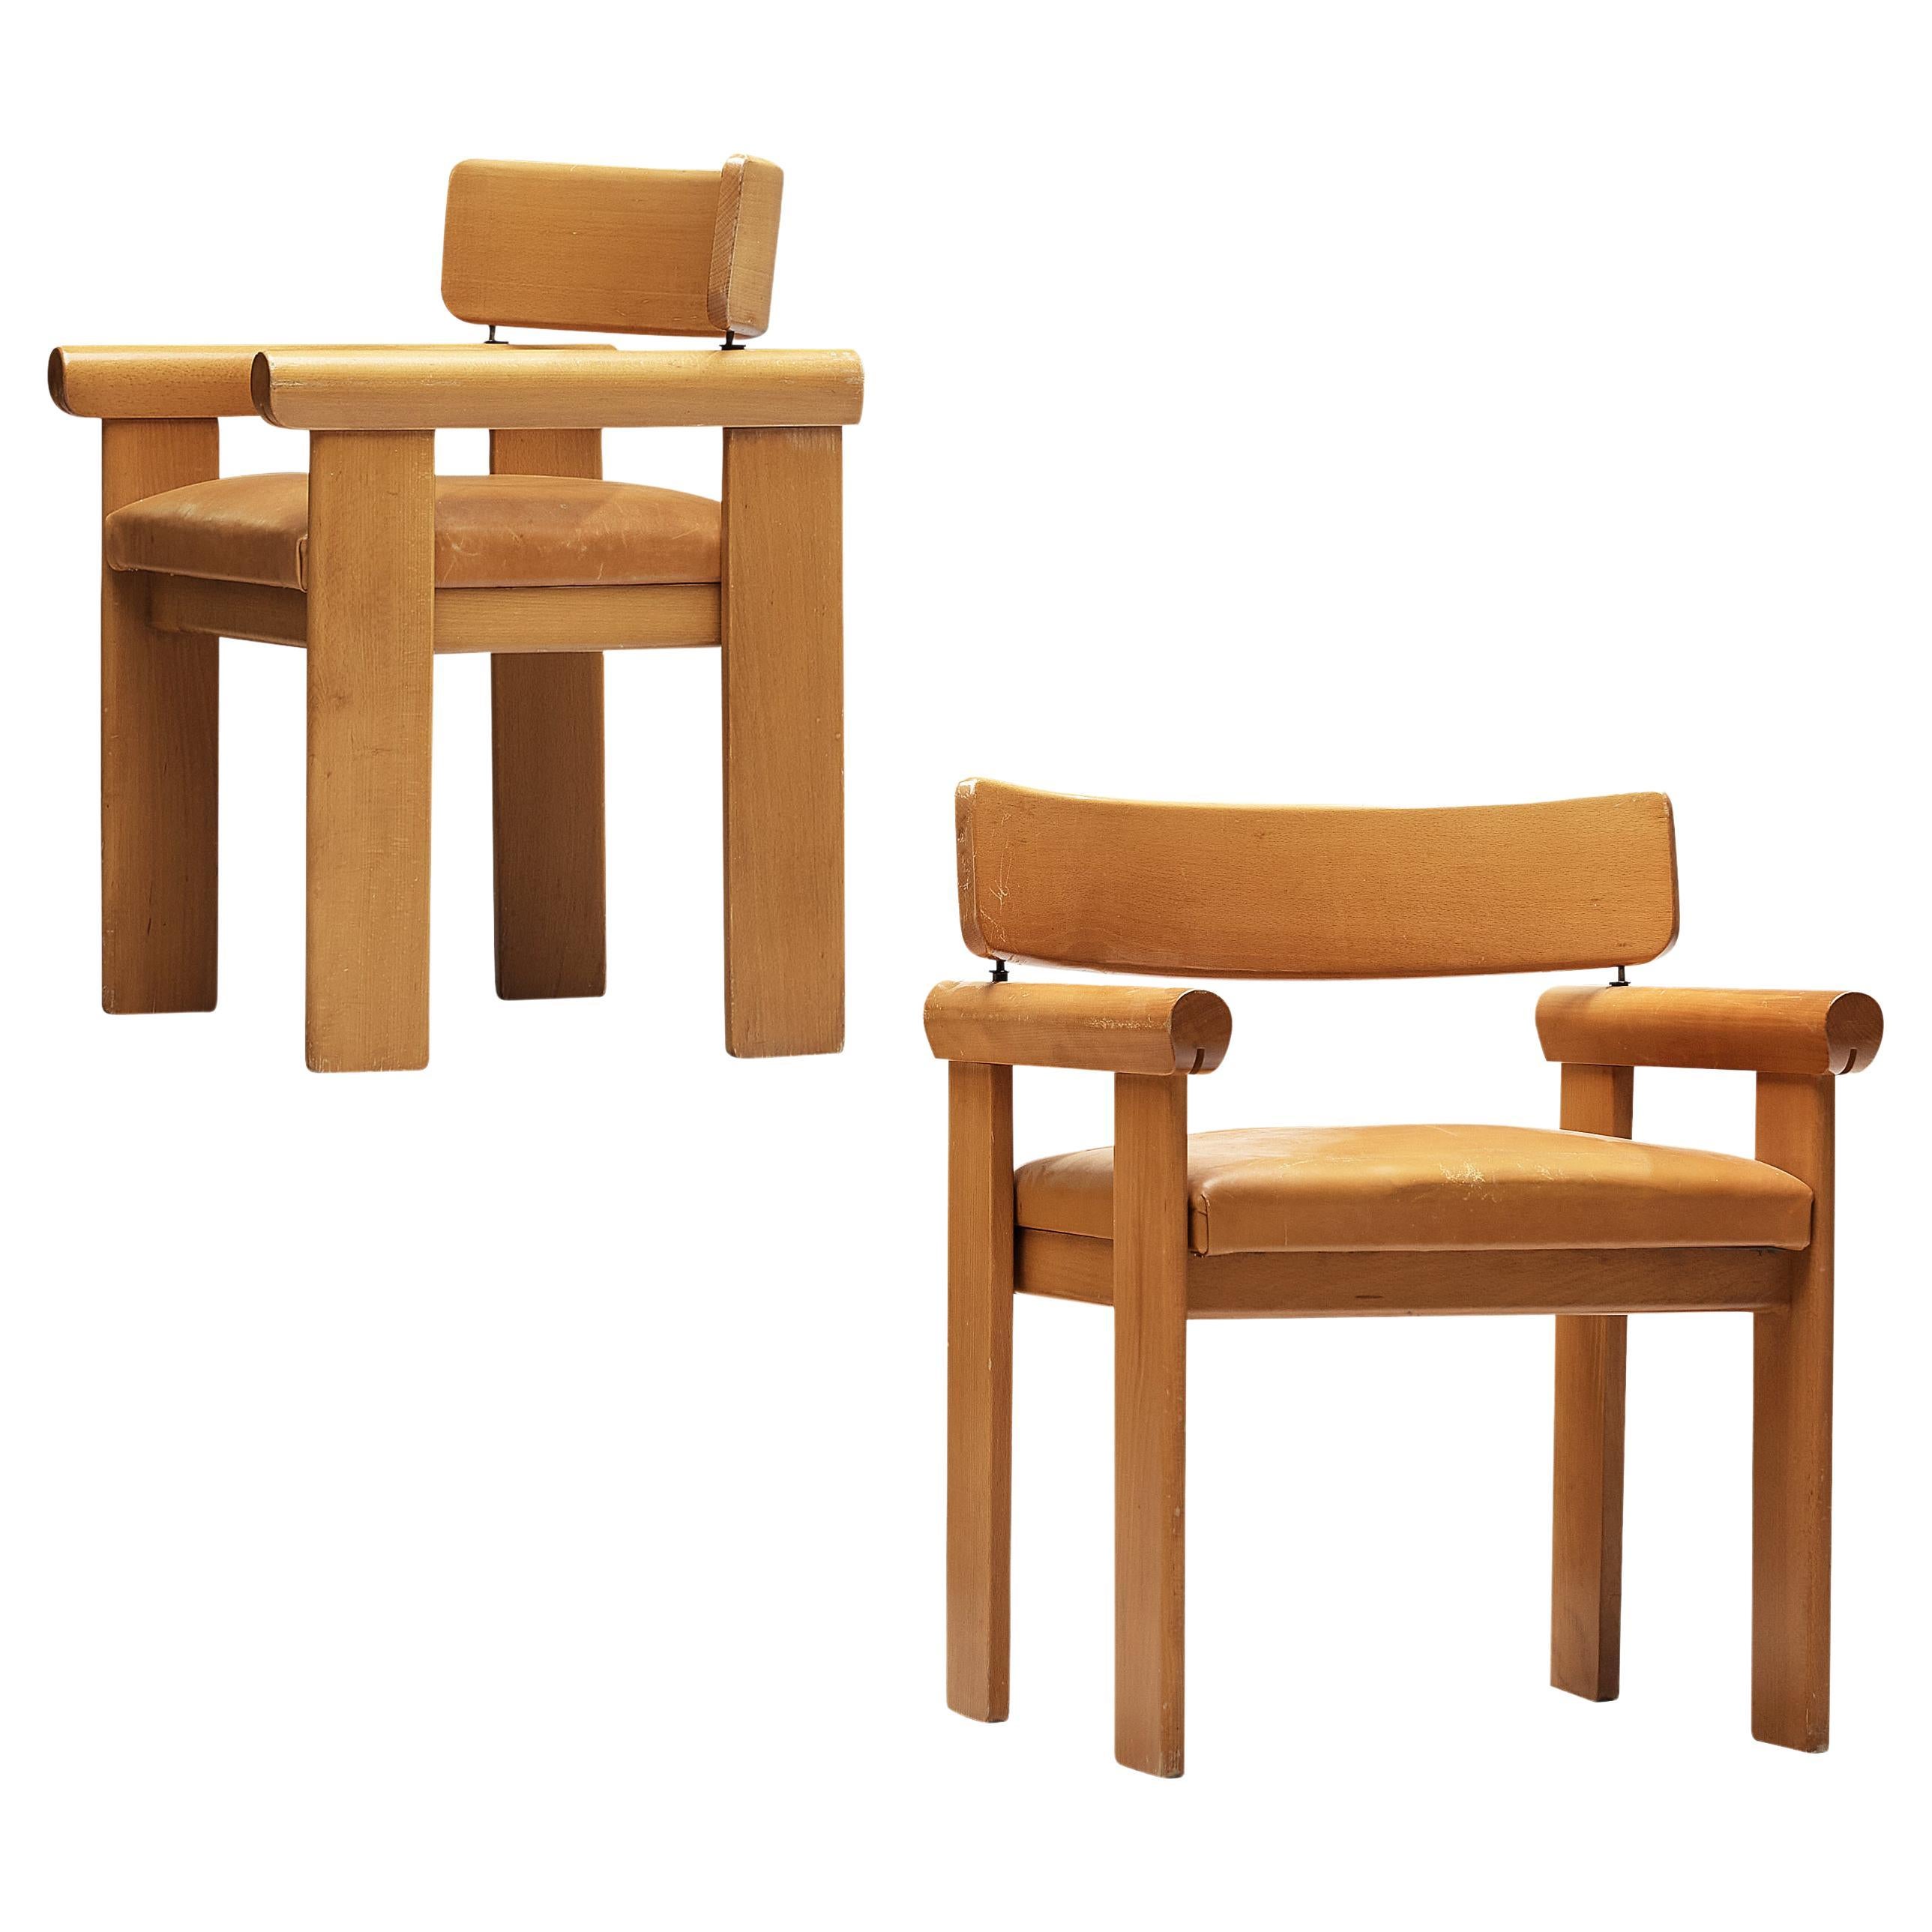 Italian Pair of Architectural Armchairs in Cognac Leather